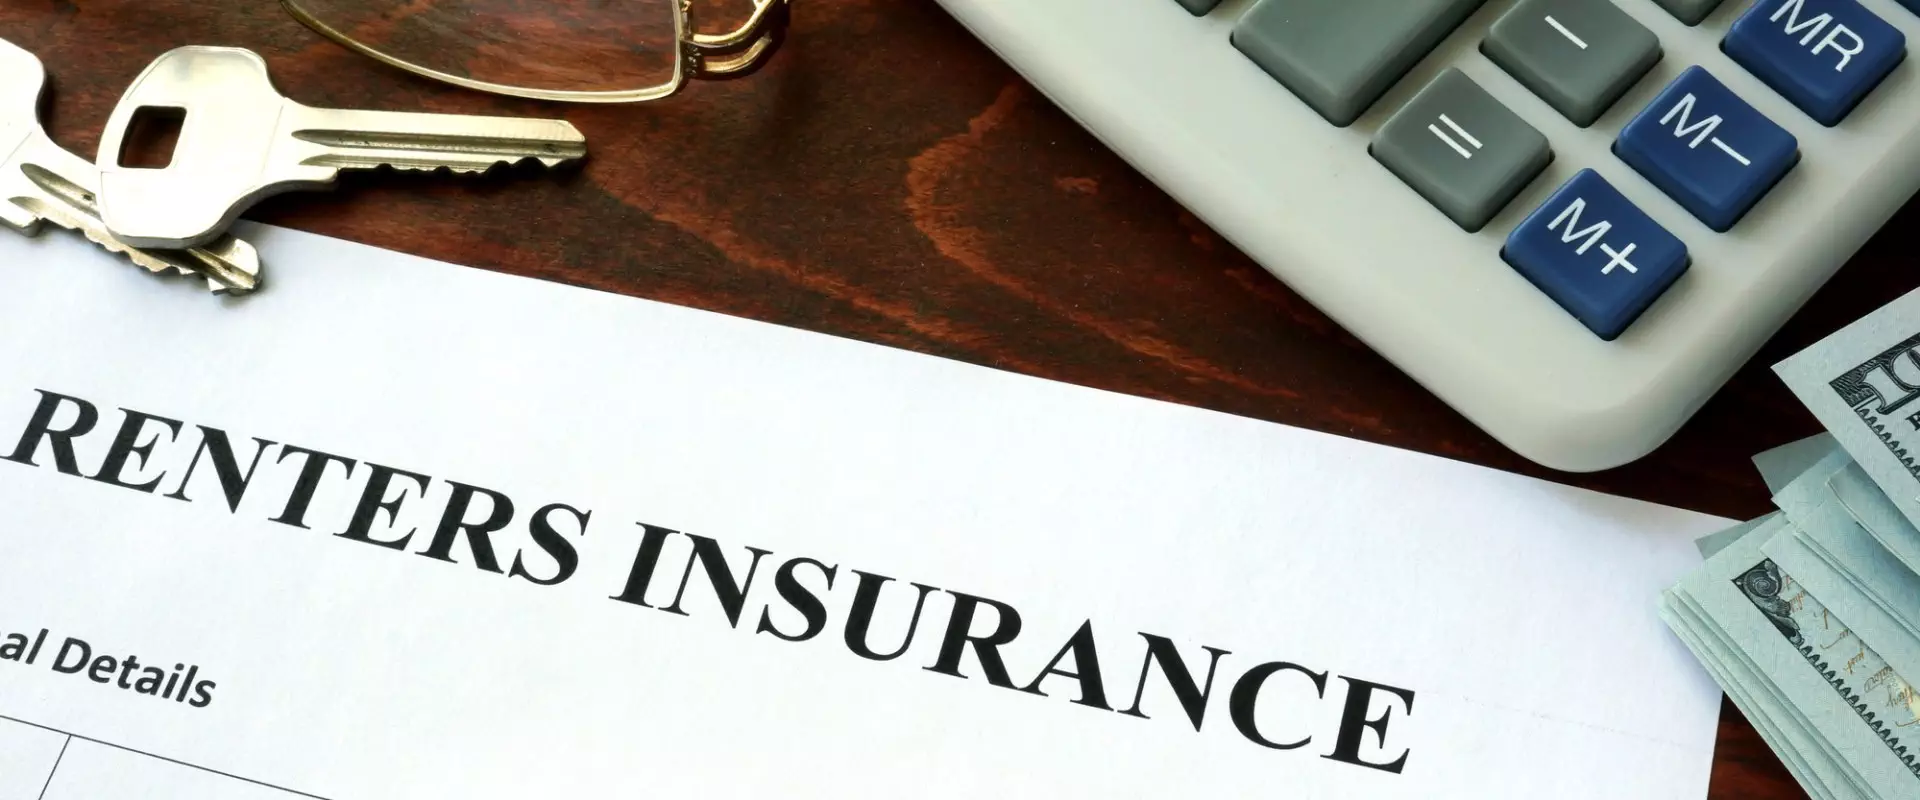 When and why does a person need renter’s insurance?